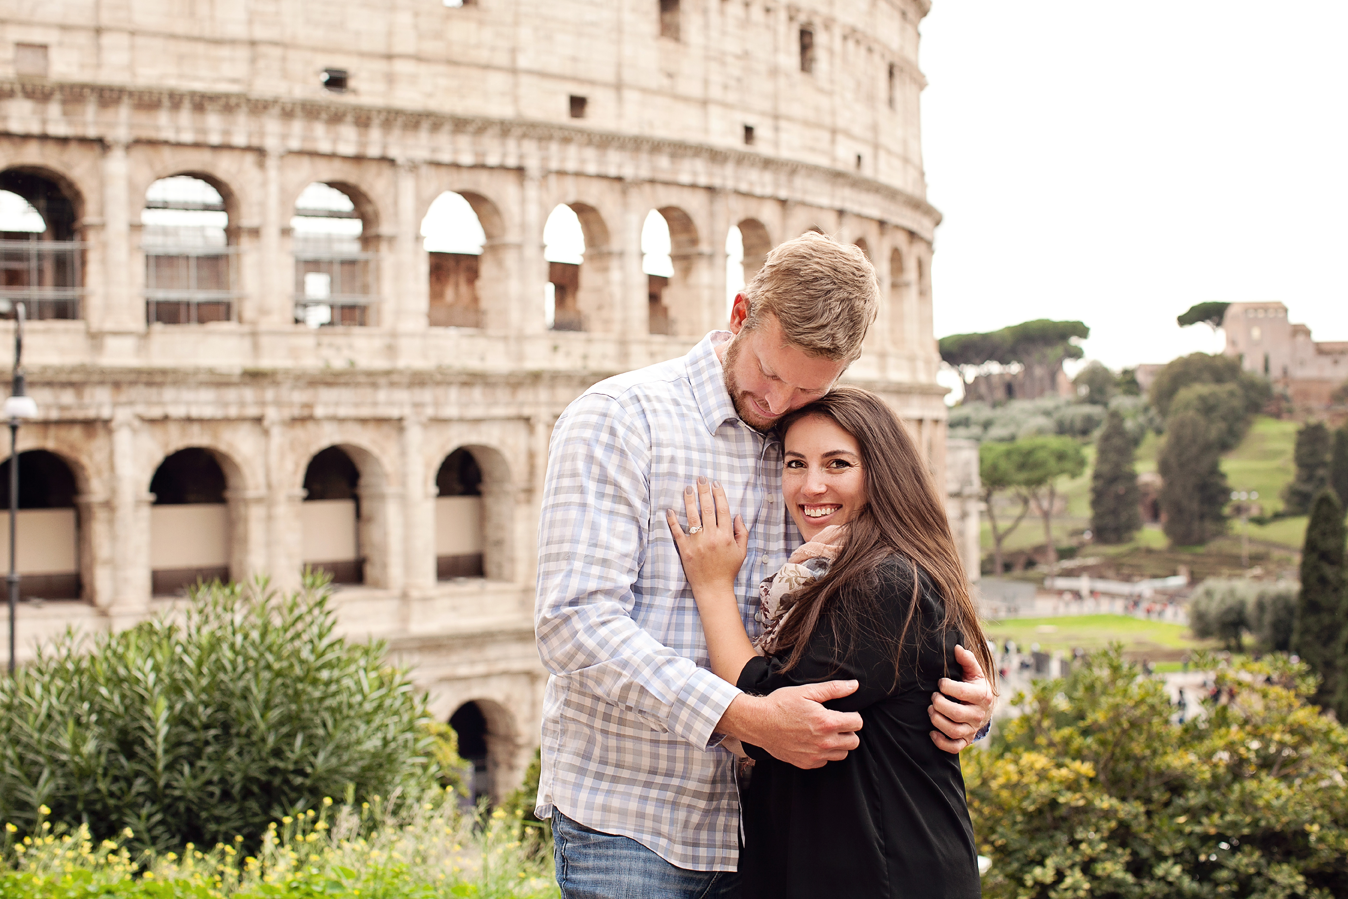 Honeymoon, vacation, family, engagement, maternity, wedding, love story individual and solo photoshoots in Rome, Italy by photographer Tricia Anne Photography | Rome Photographer, Colosseum Surprise Proposal, Rome Engagement Photographer, colosseum photo shoot in rome, Rome Vacation Photographer, Rome Family Photographer, English speaking photographer in Rome